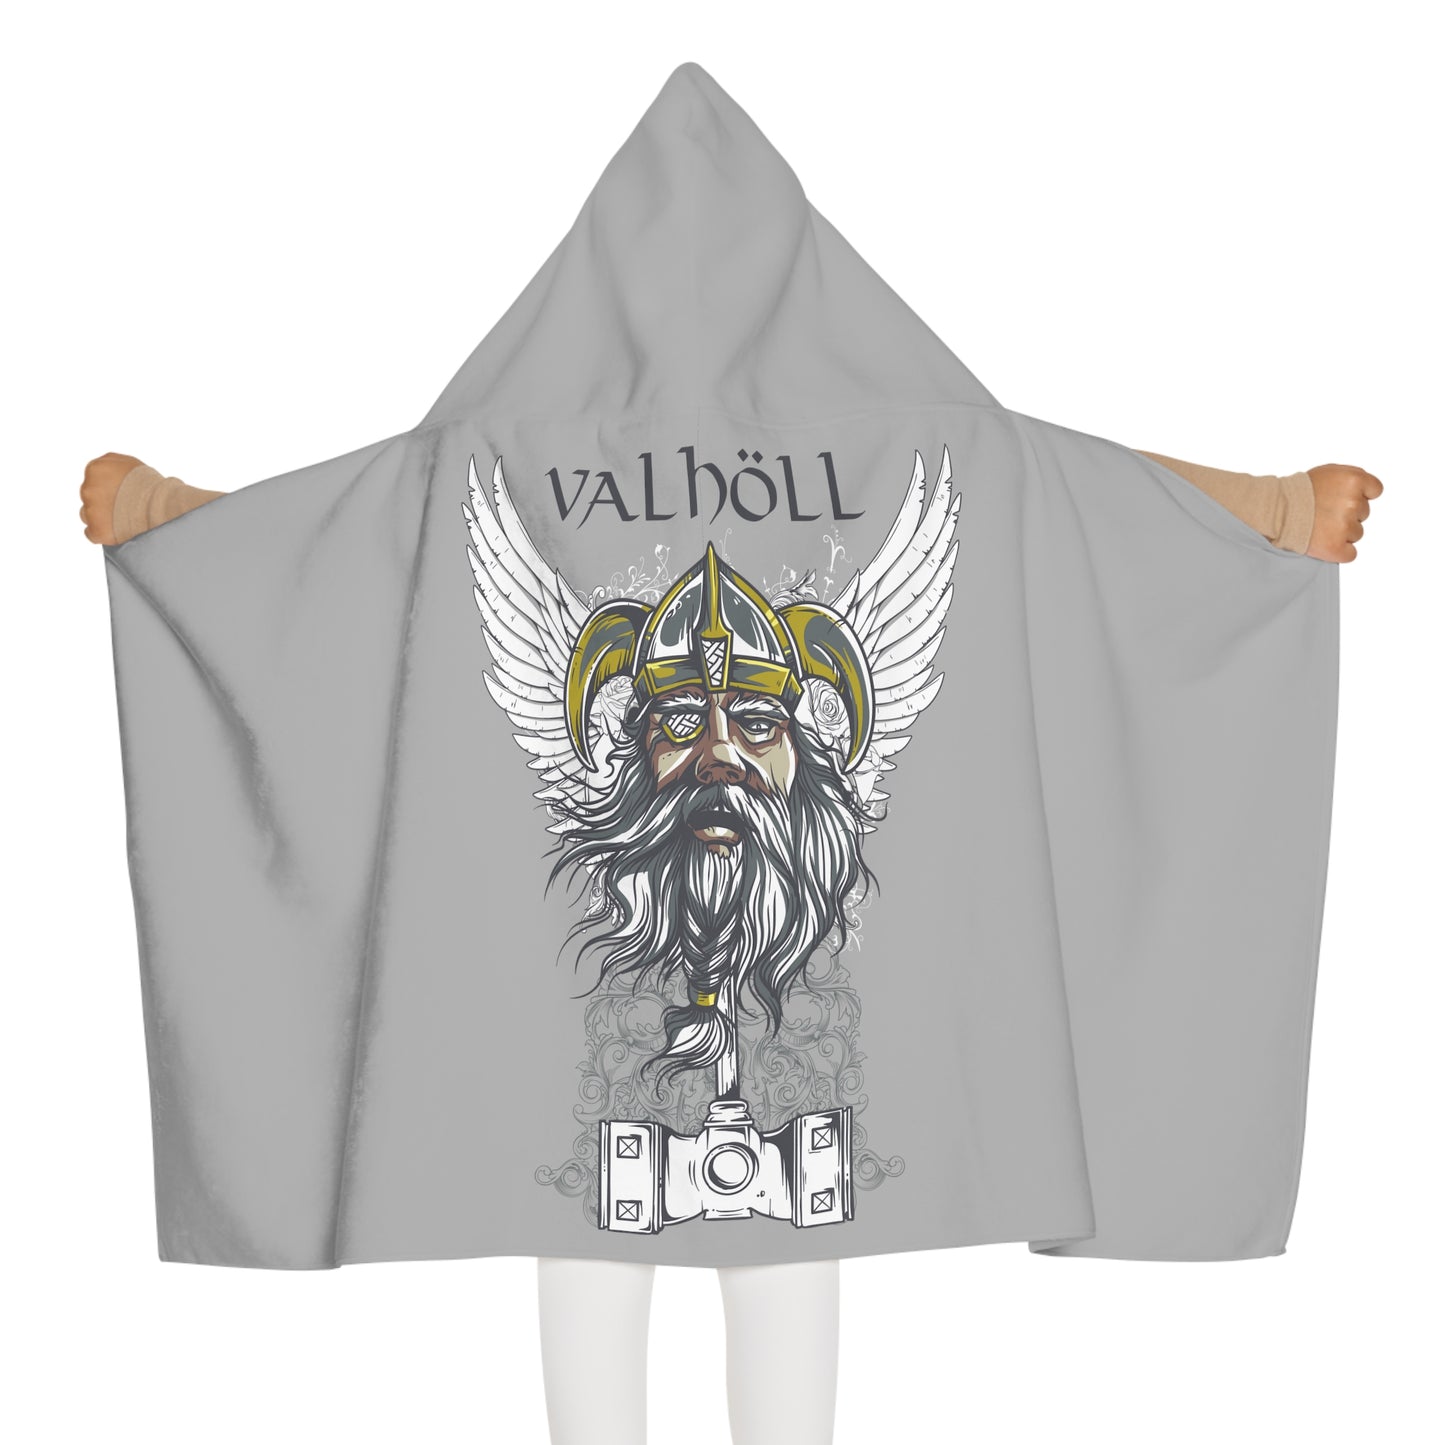 Youth Hooded Valholl Towel (Light Grey)